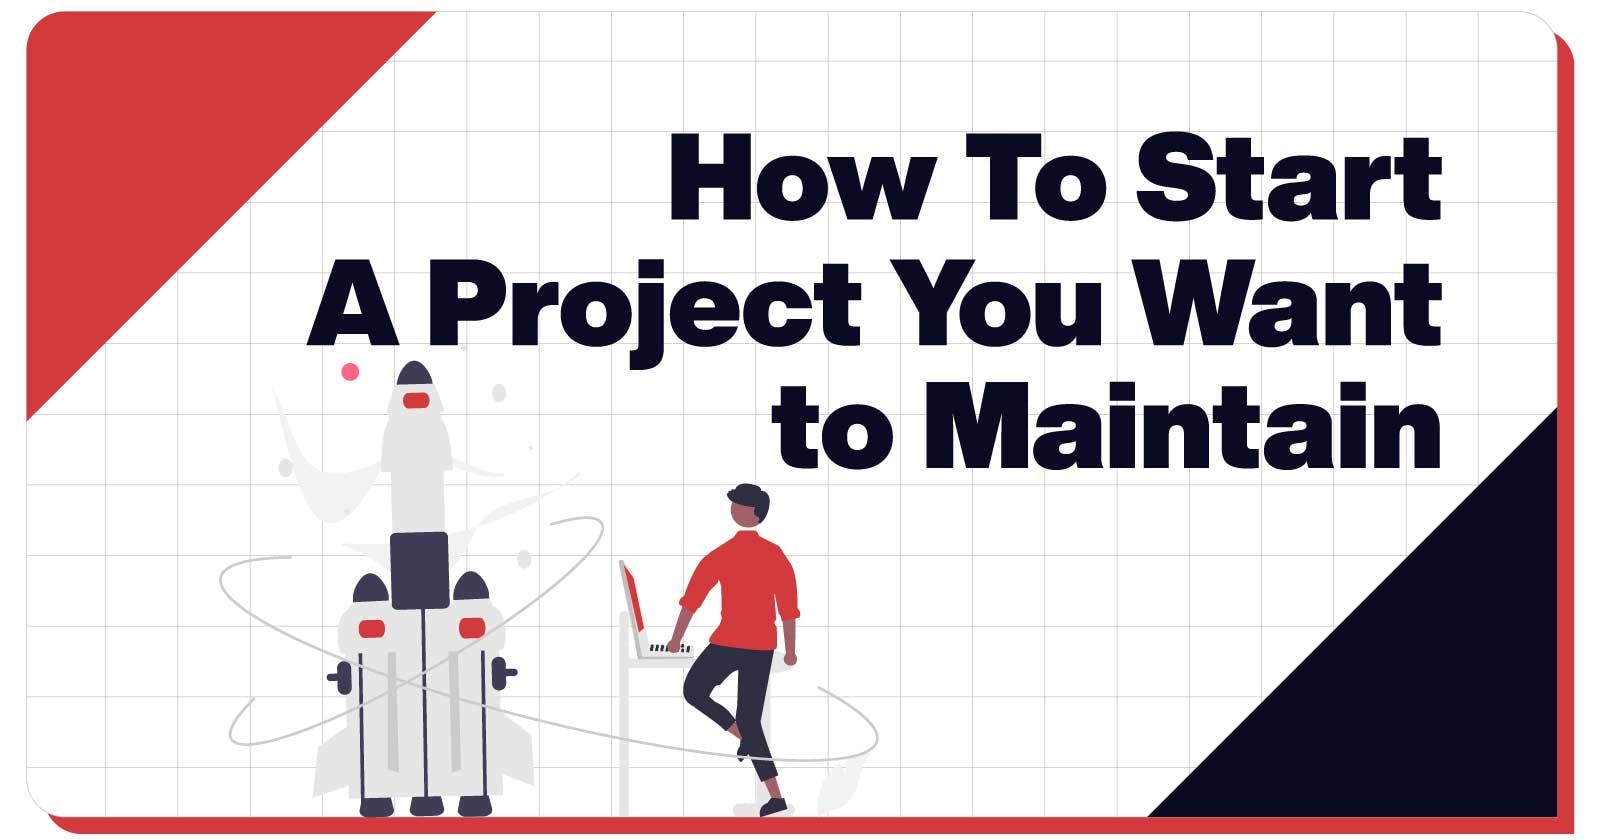 How to Start a Software Project That You Want to Maintain